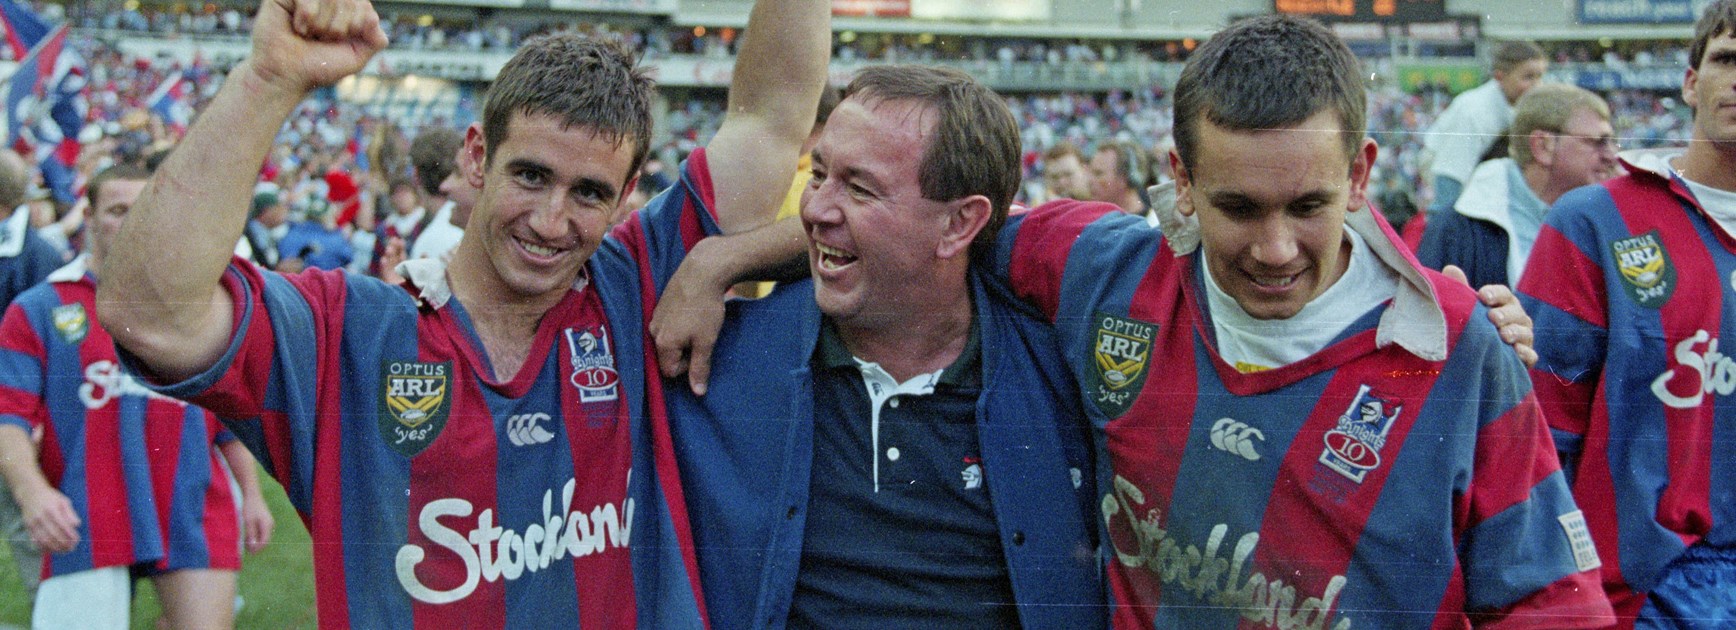 How 'George Clooney' helped Knights in 97 grand final